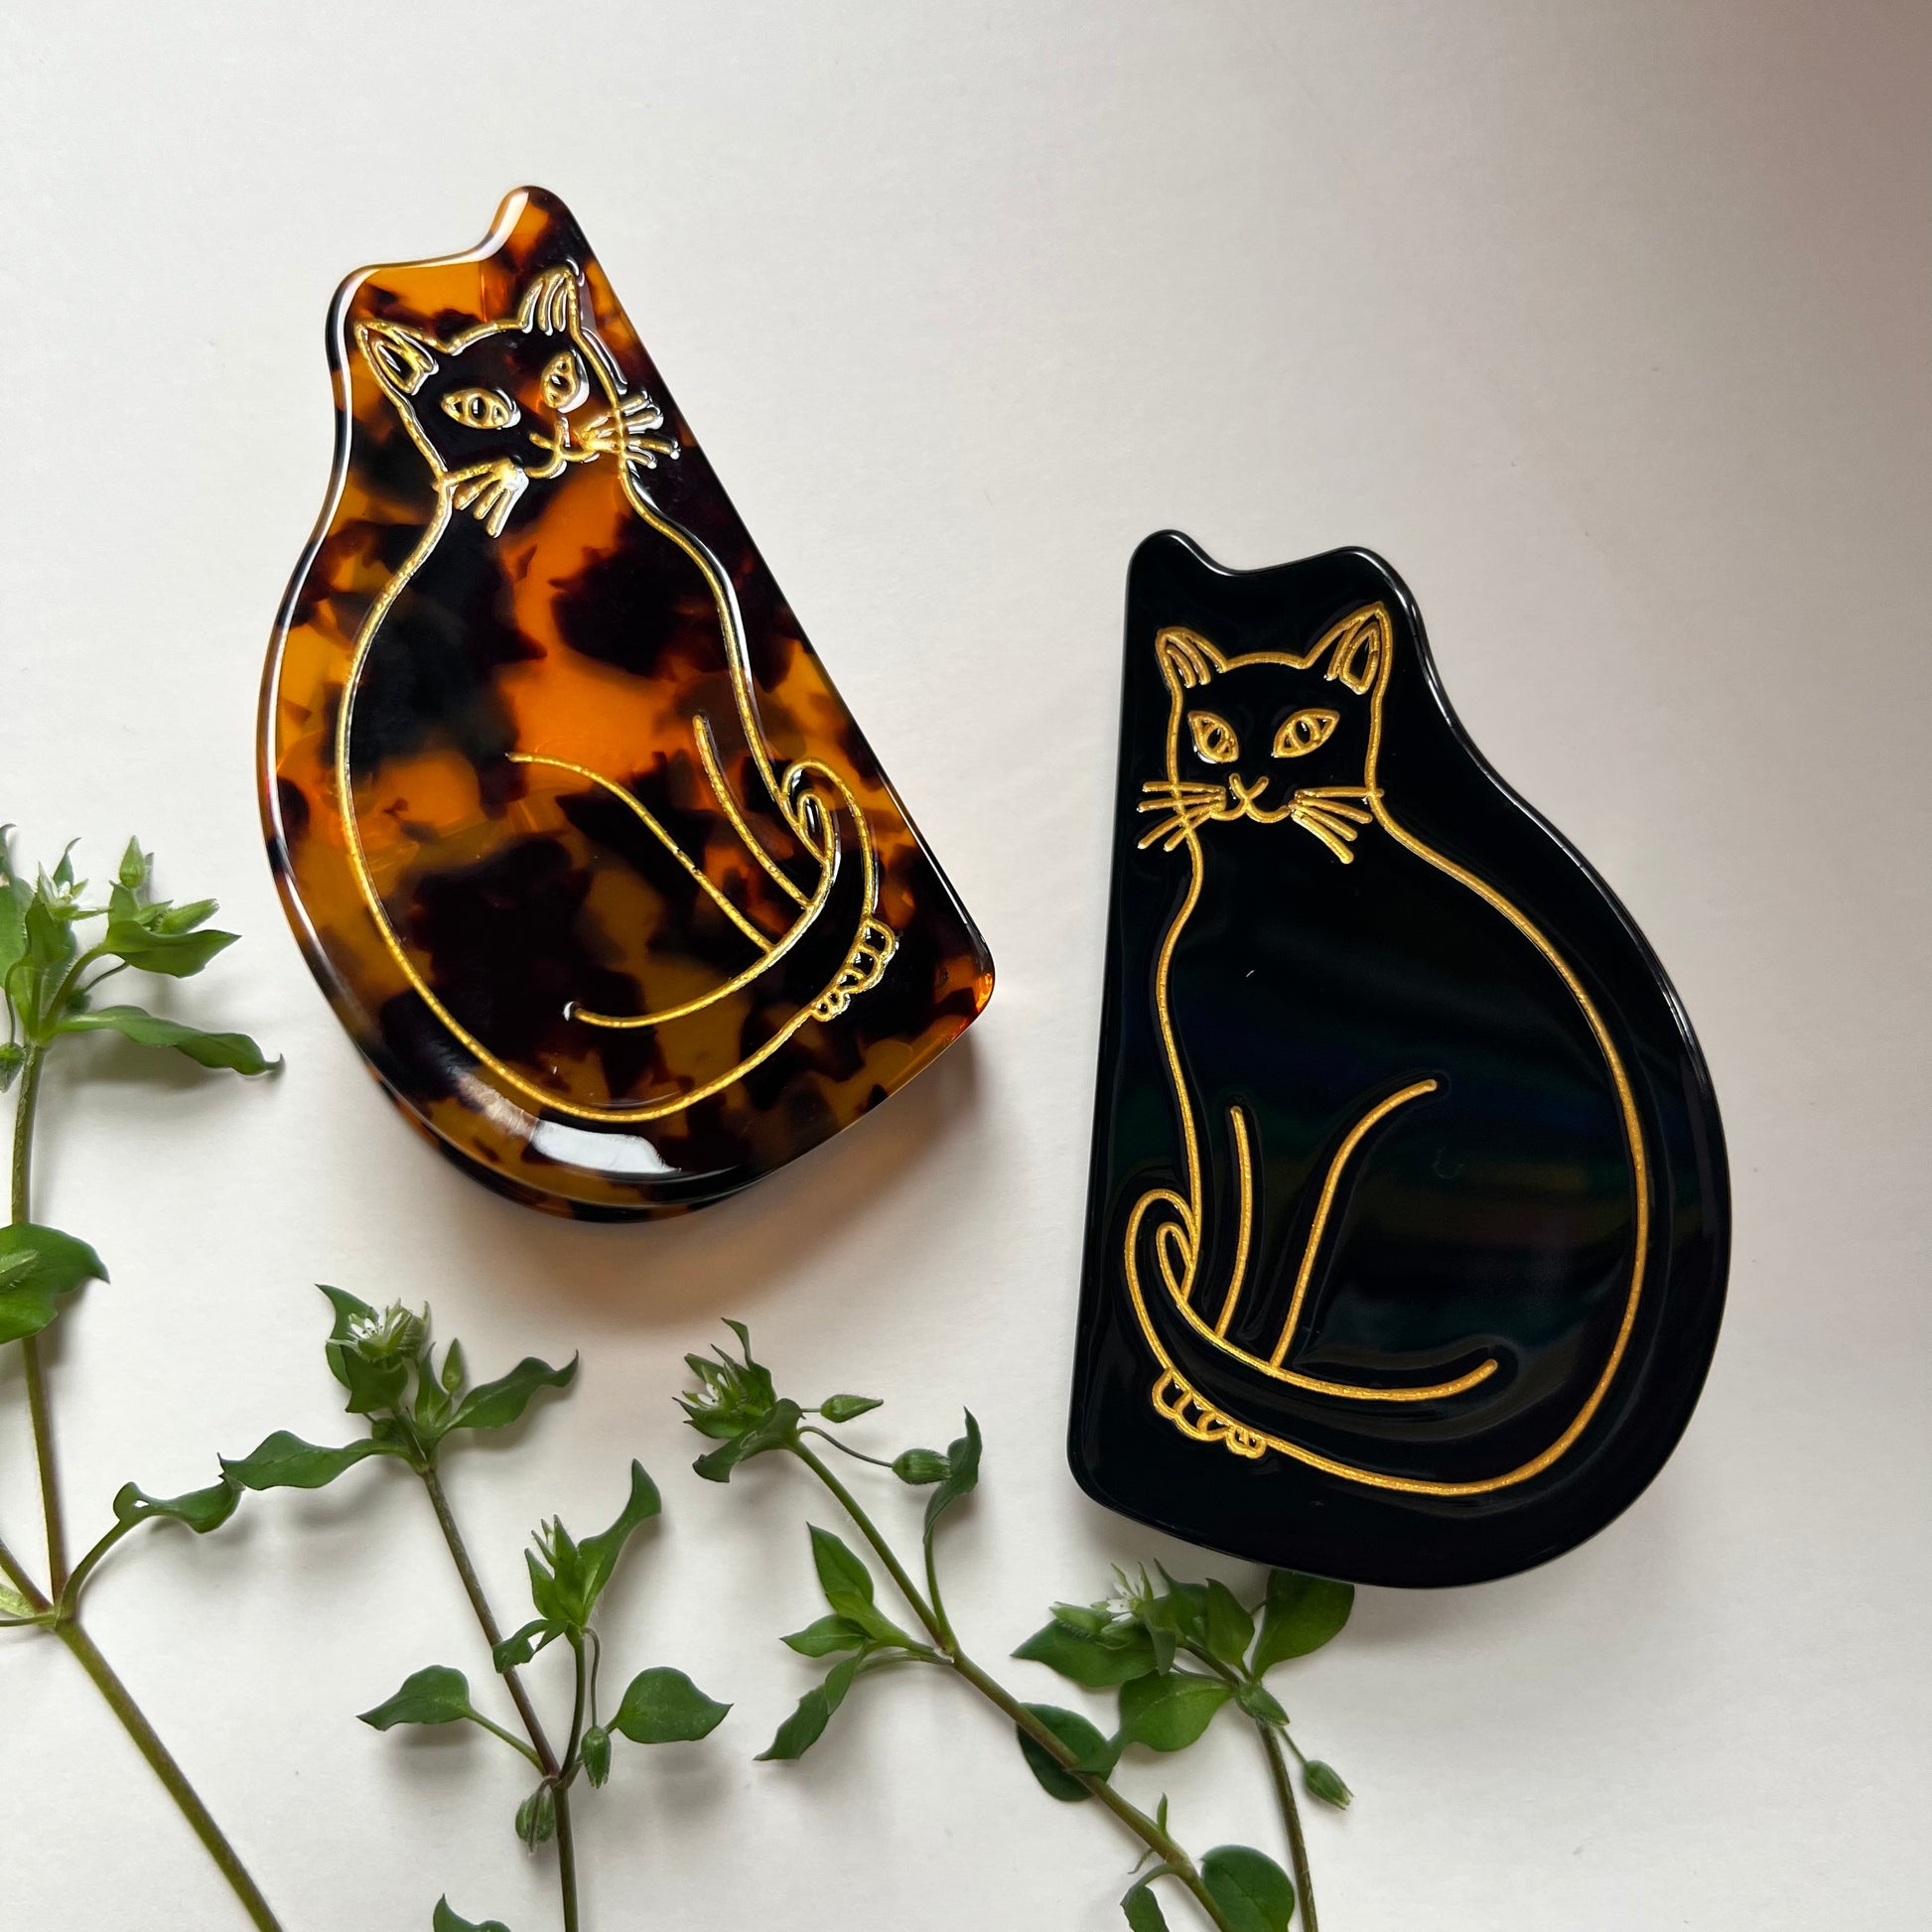 2 cat hair clips on a white background with greenery.